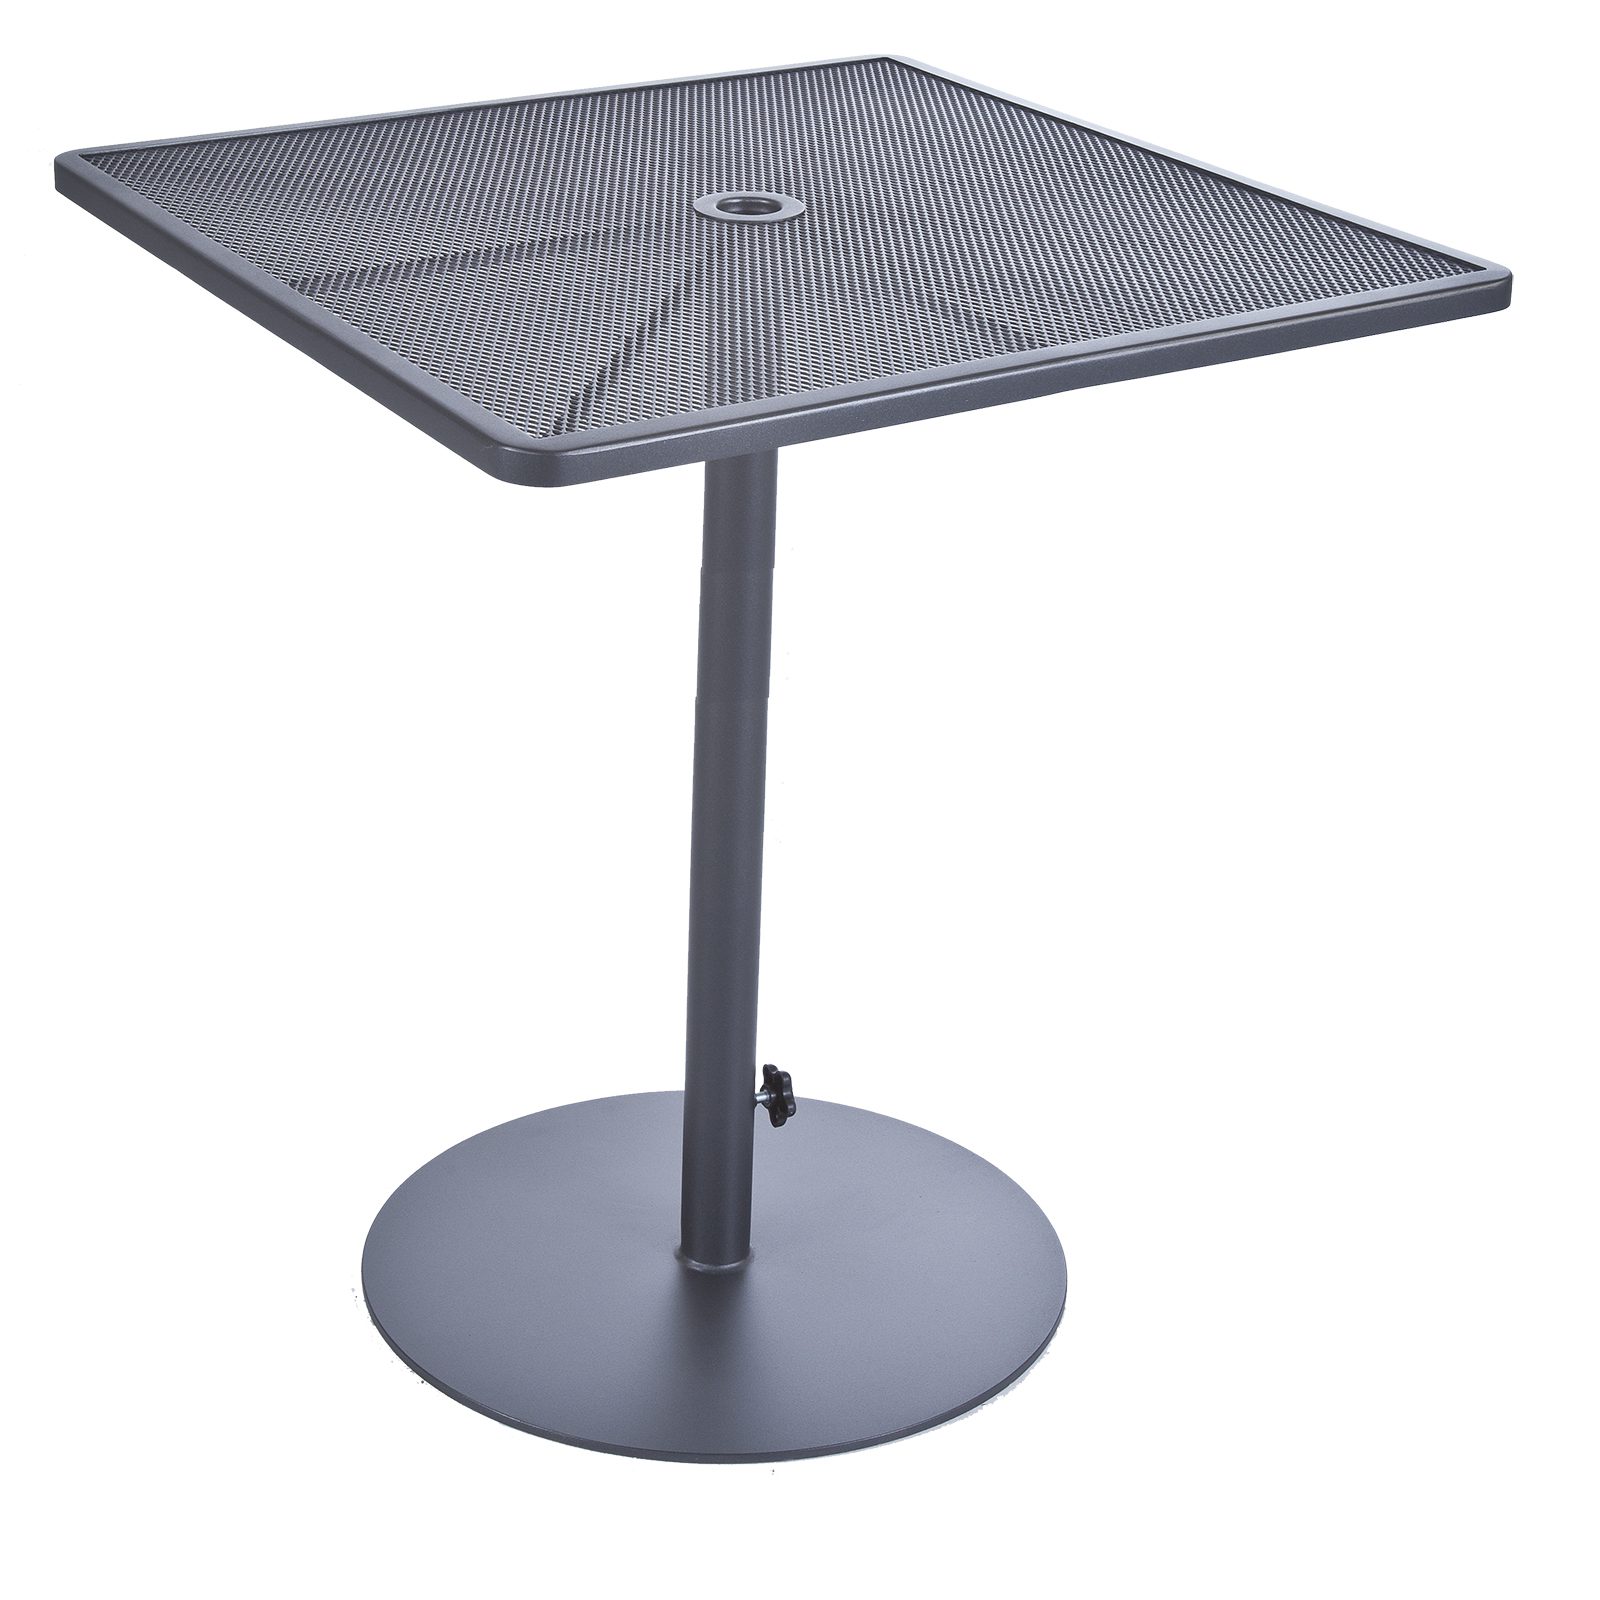 34" Sq. Pedestal Bar Table - Fully Welded Tables - Pedestal Iron Tables 113